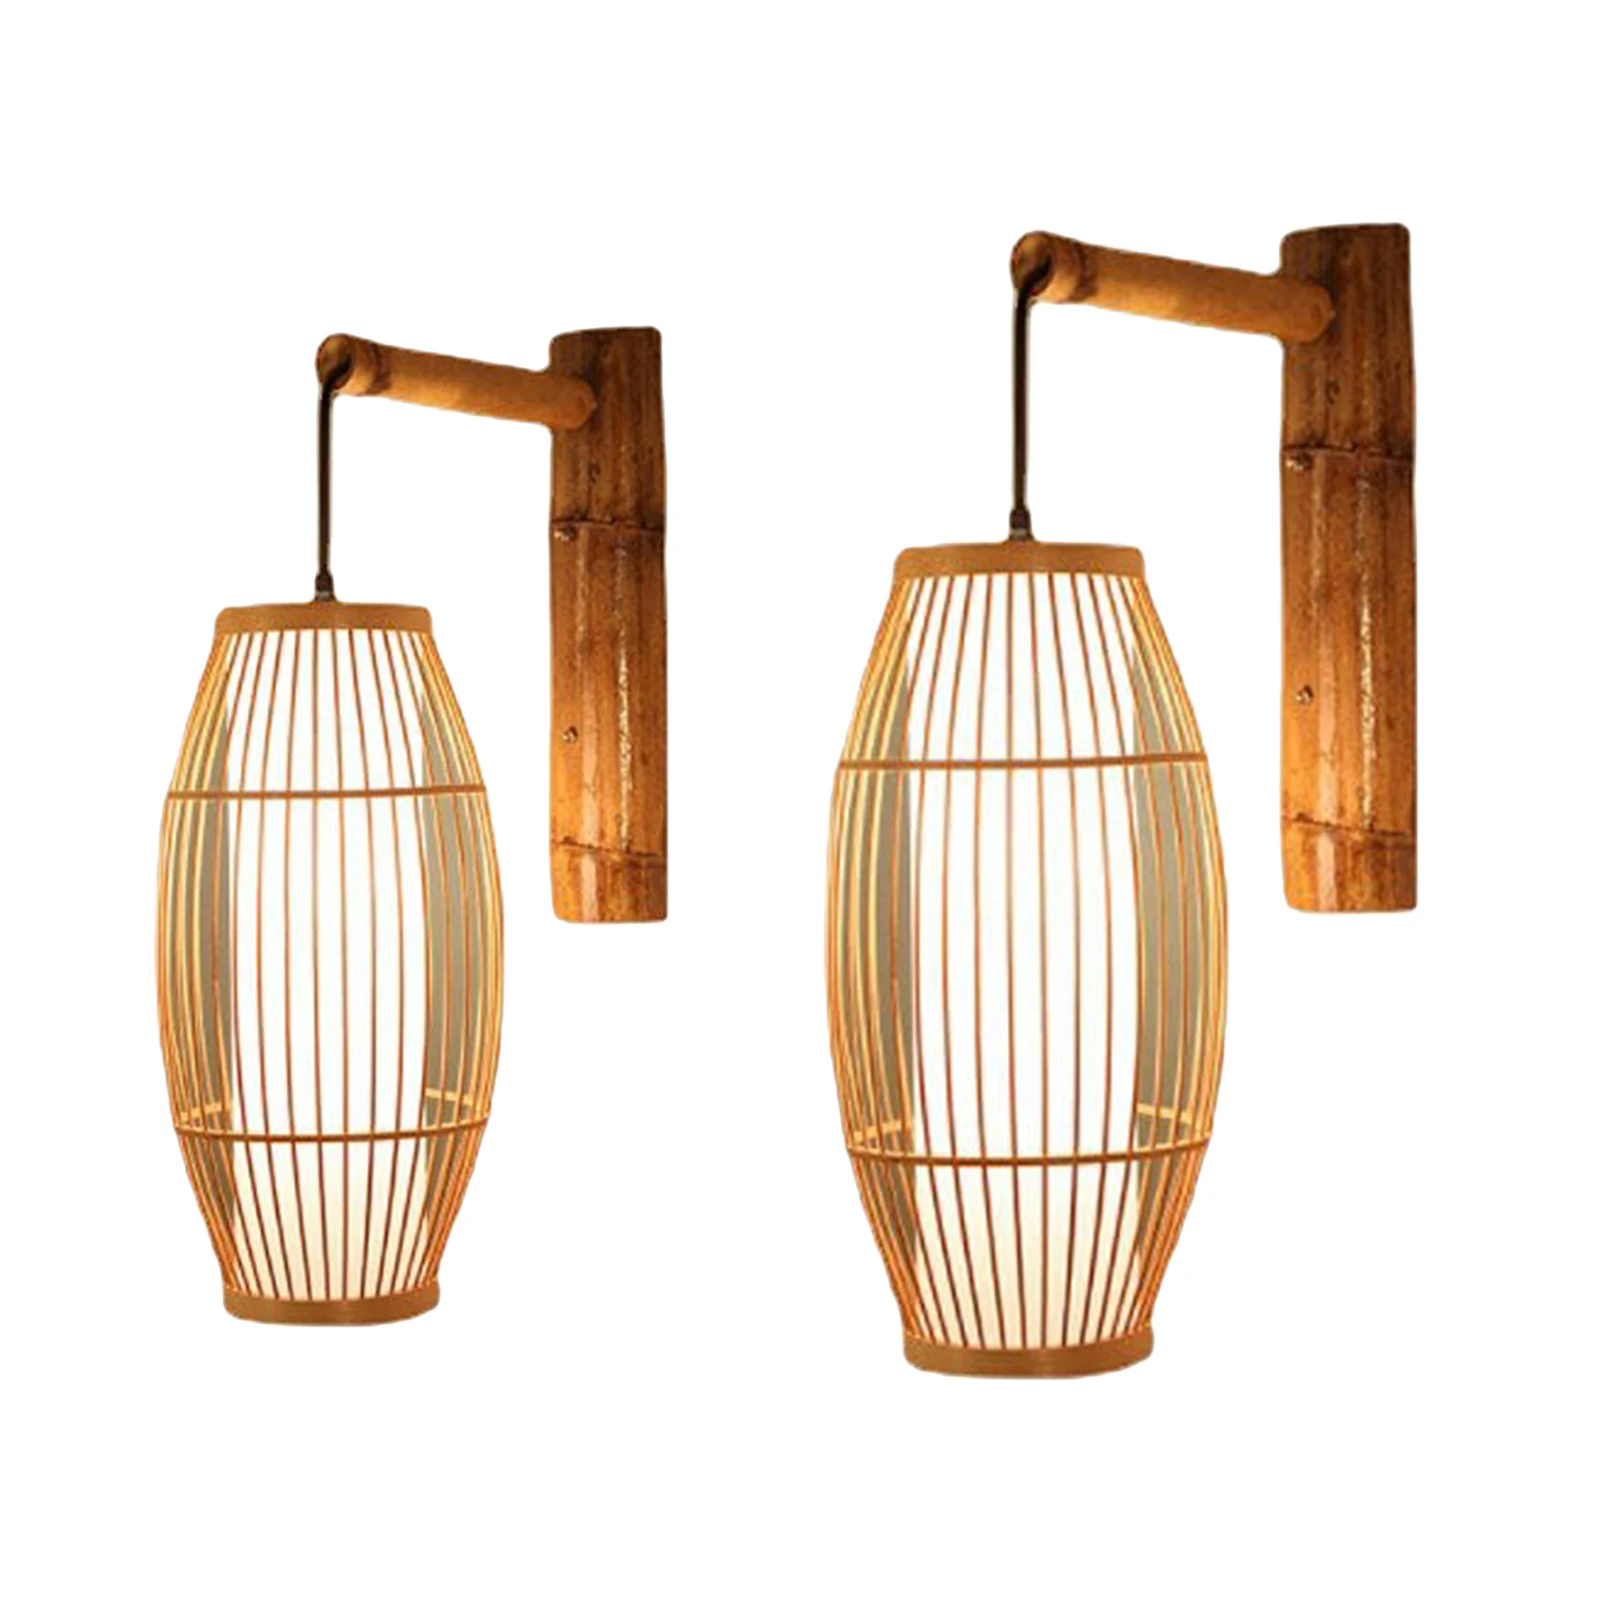 Chinese Style Bamboo Wall Chandelier Decor Weave Decorative Ceiling E27 Wall Pendent Lamp for Tea House Gift Zen